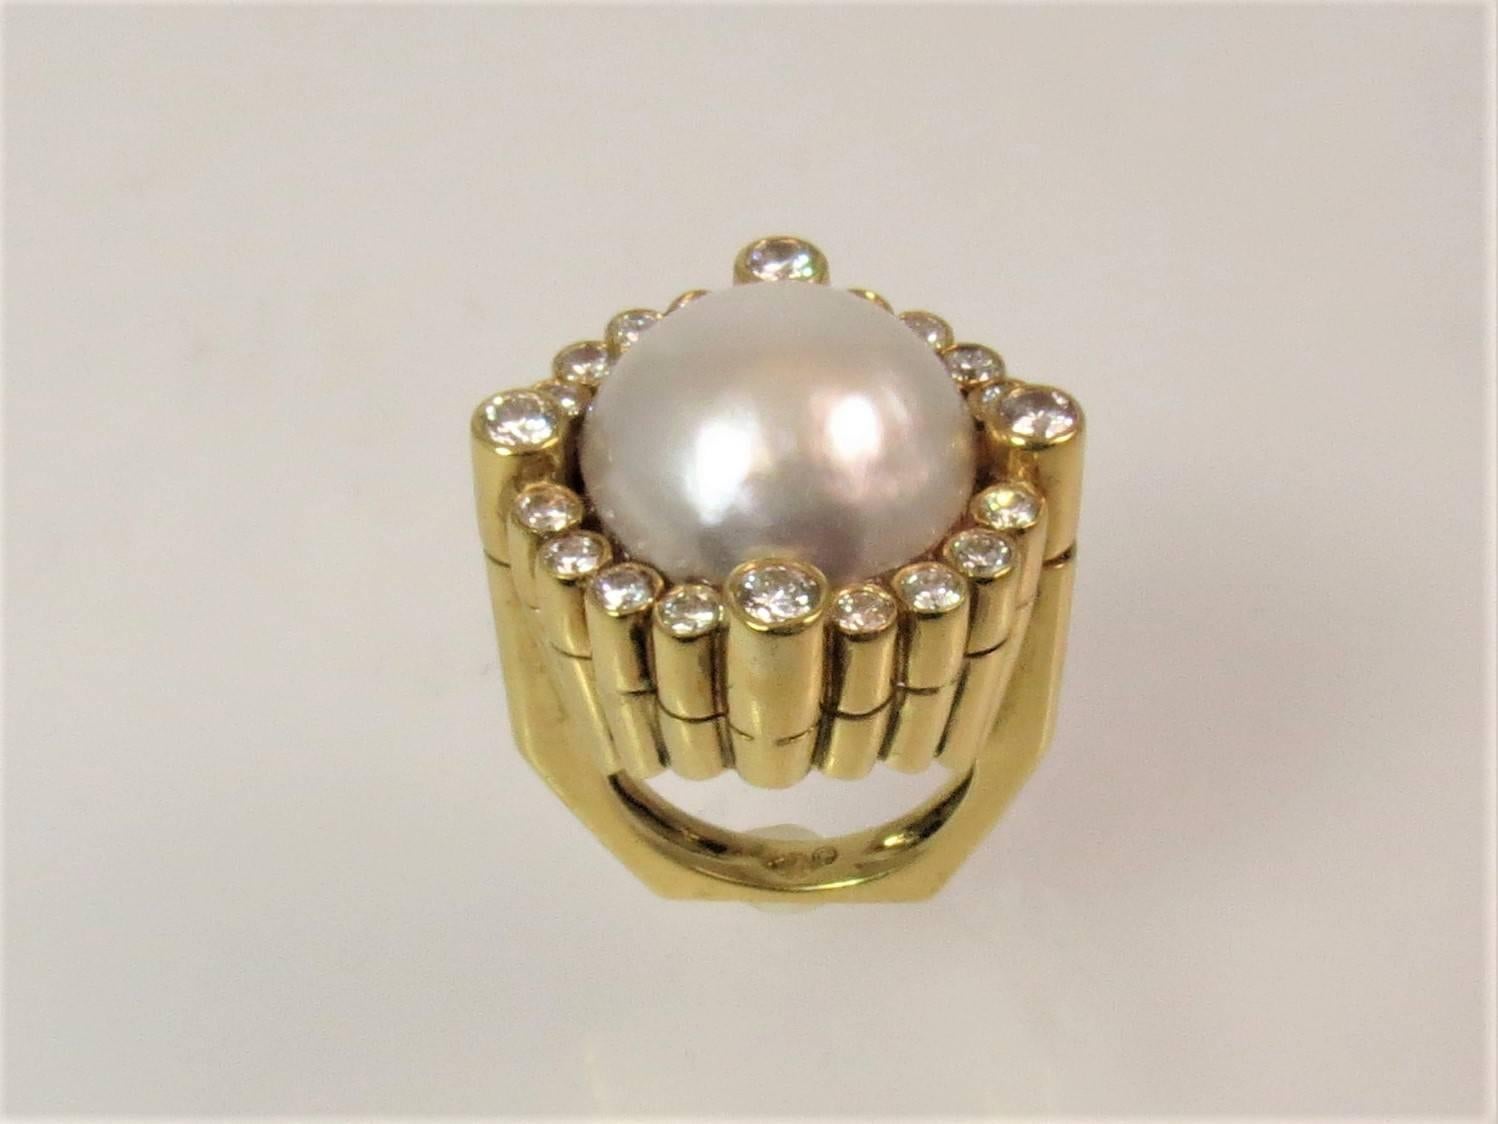 18K yellow gold ring, with Mabe pearl measuring 15.5mm and 20 full cut round diamonds weighing 1.29cts, G-H color, VS clarity
Finger size 5.25. May be sized